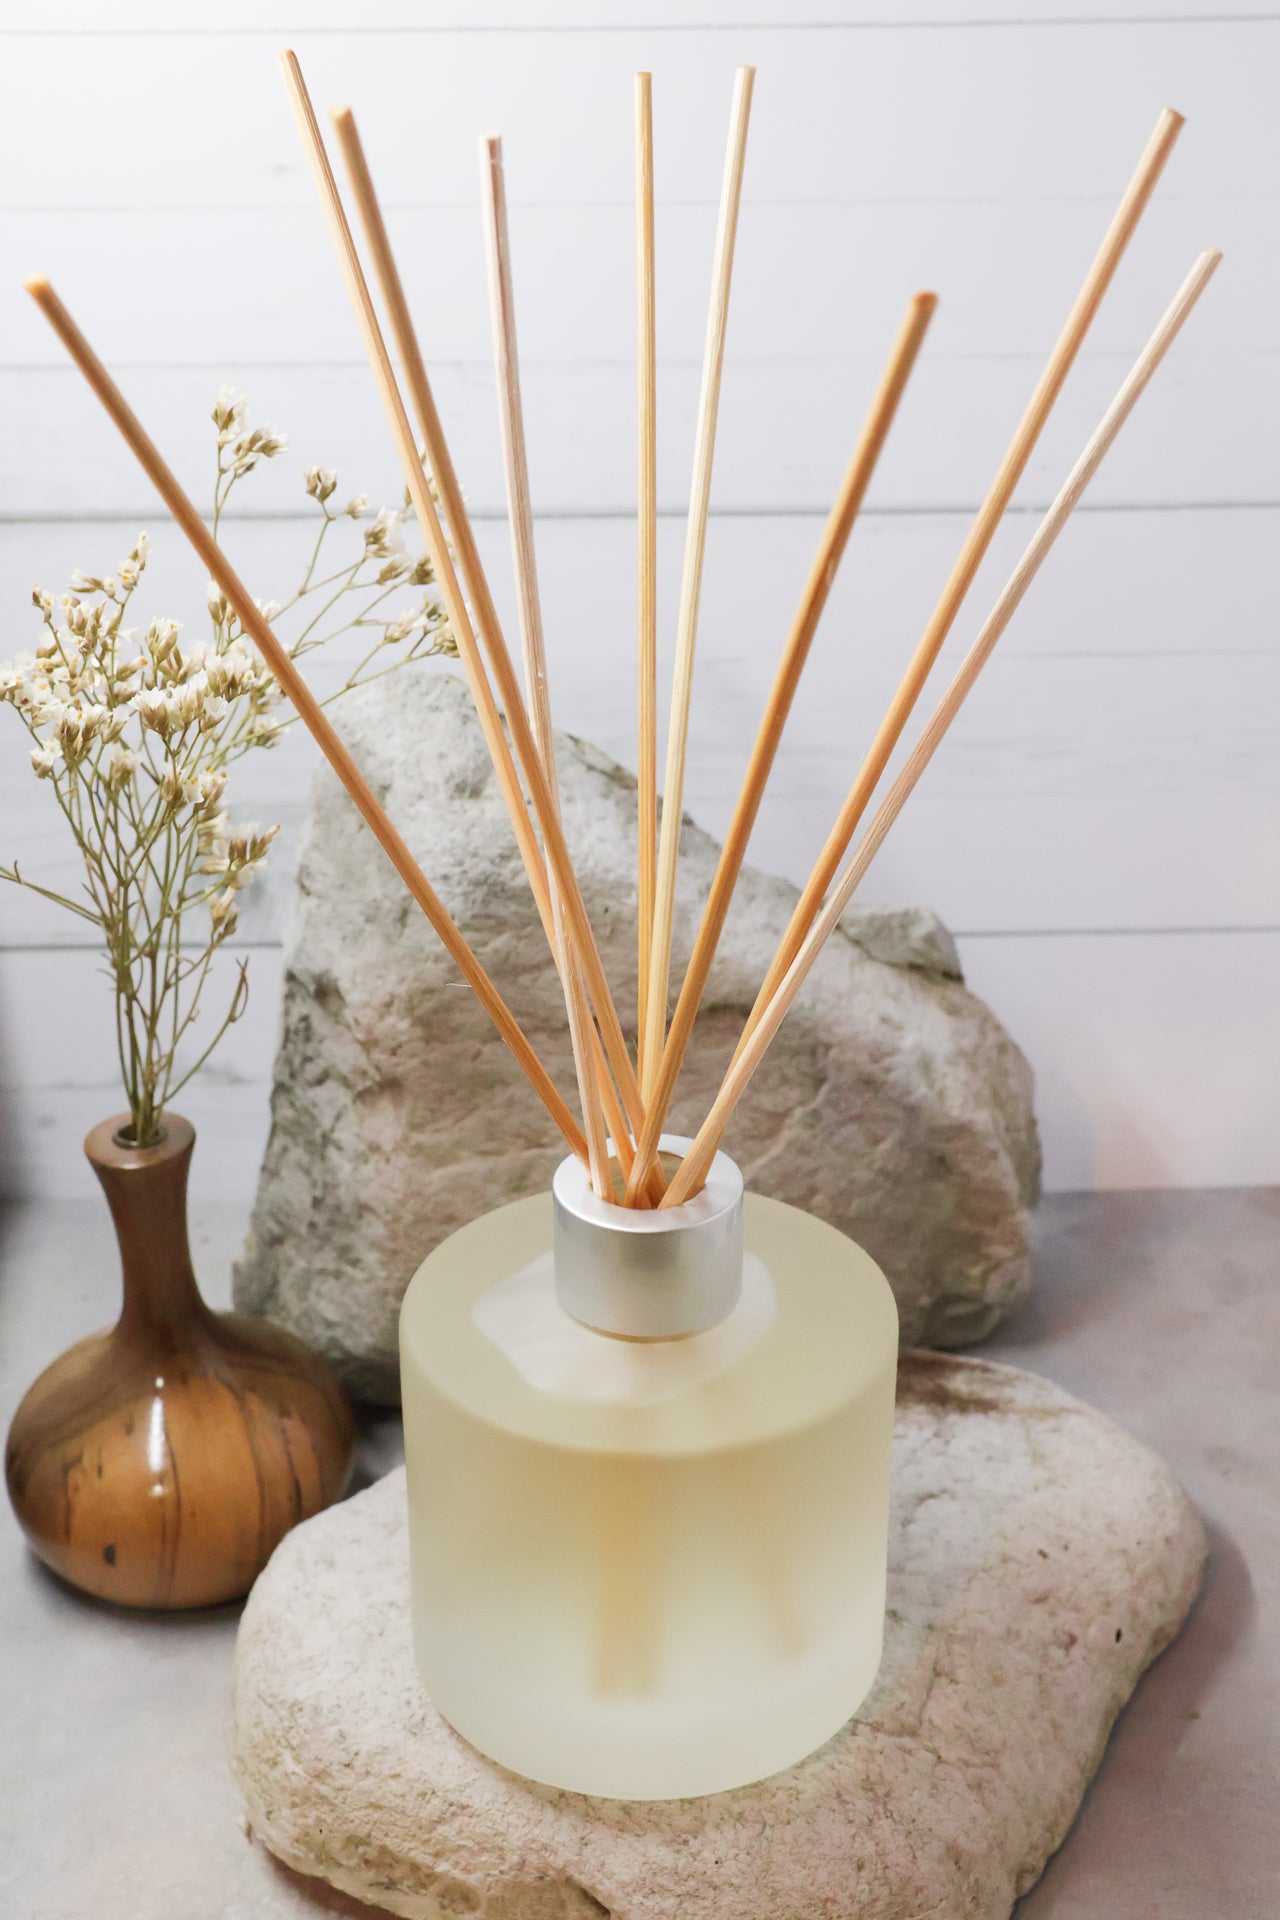 Crystal infused diffuser with wicks with the fragrance Patchouli, Sandalwood, Vanilla and Lotus